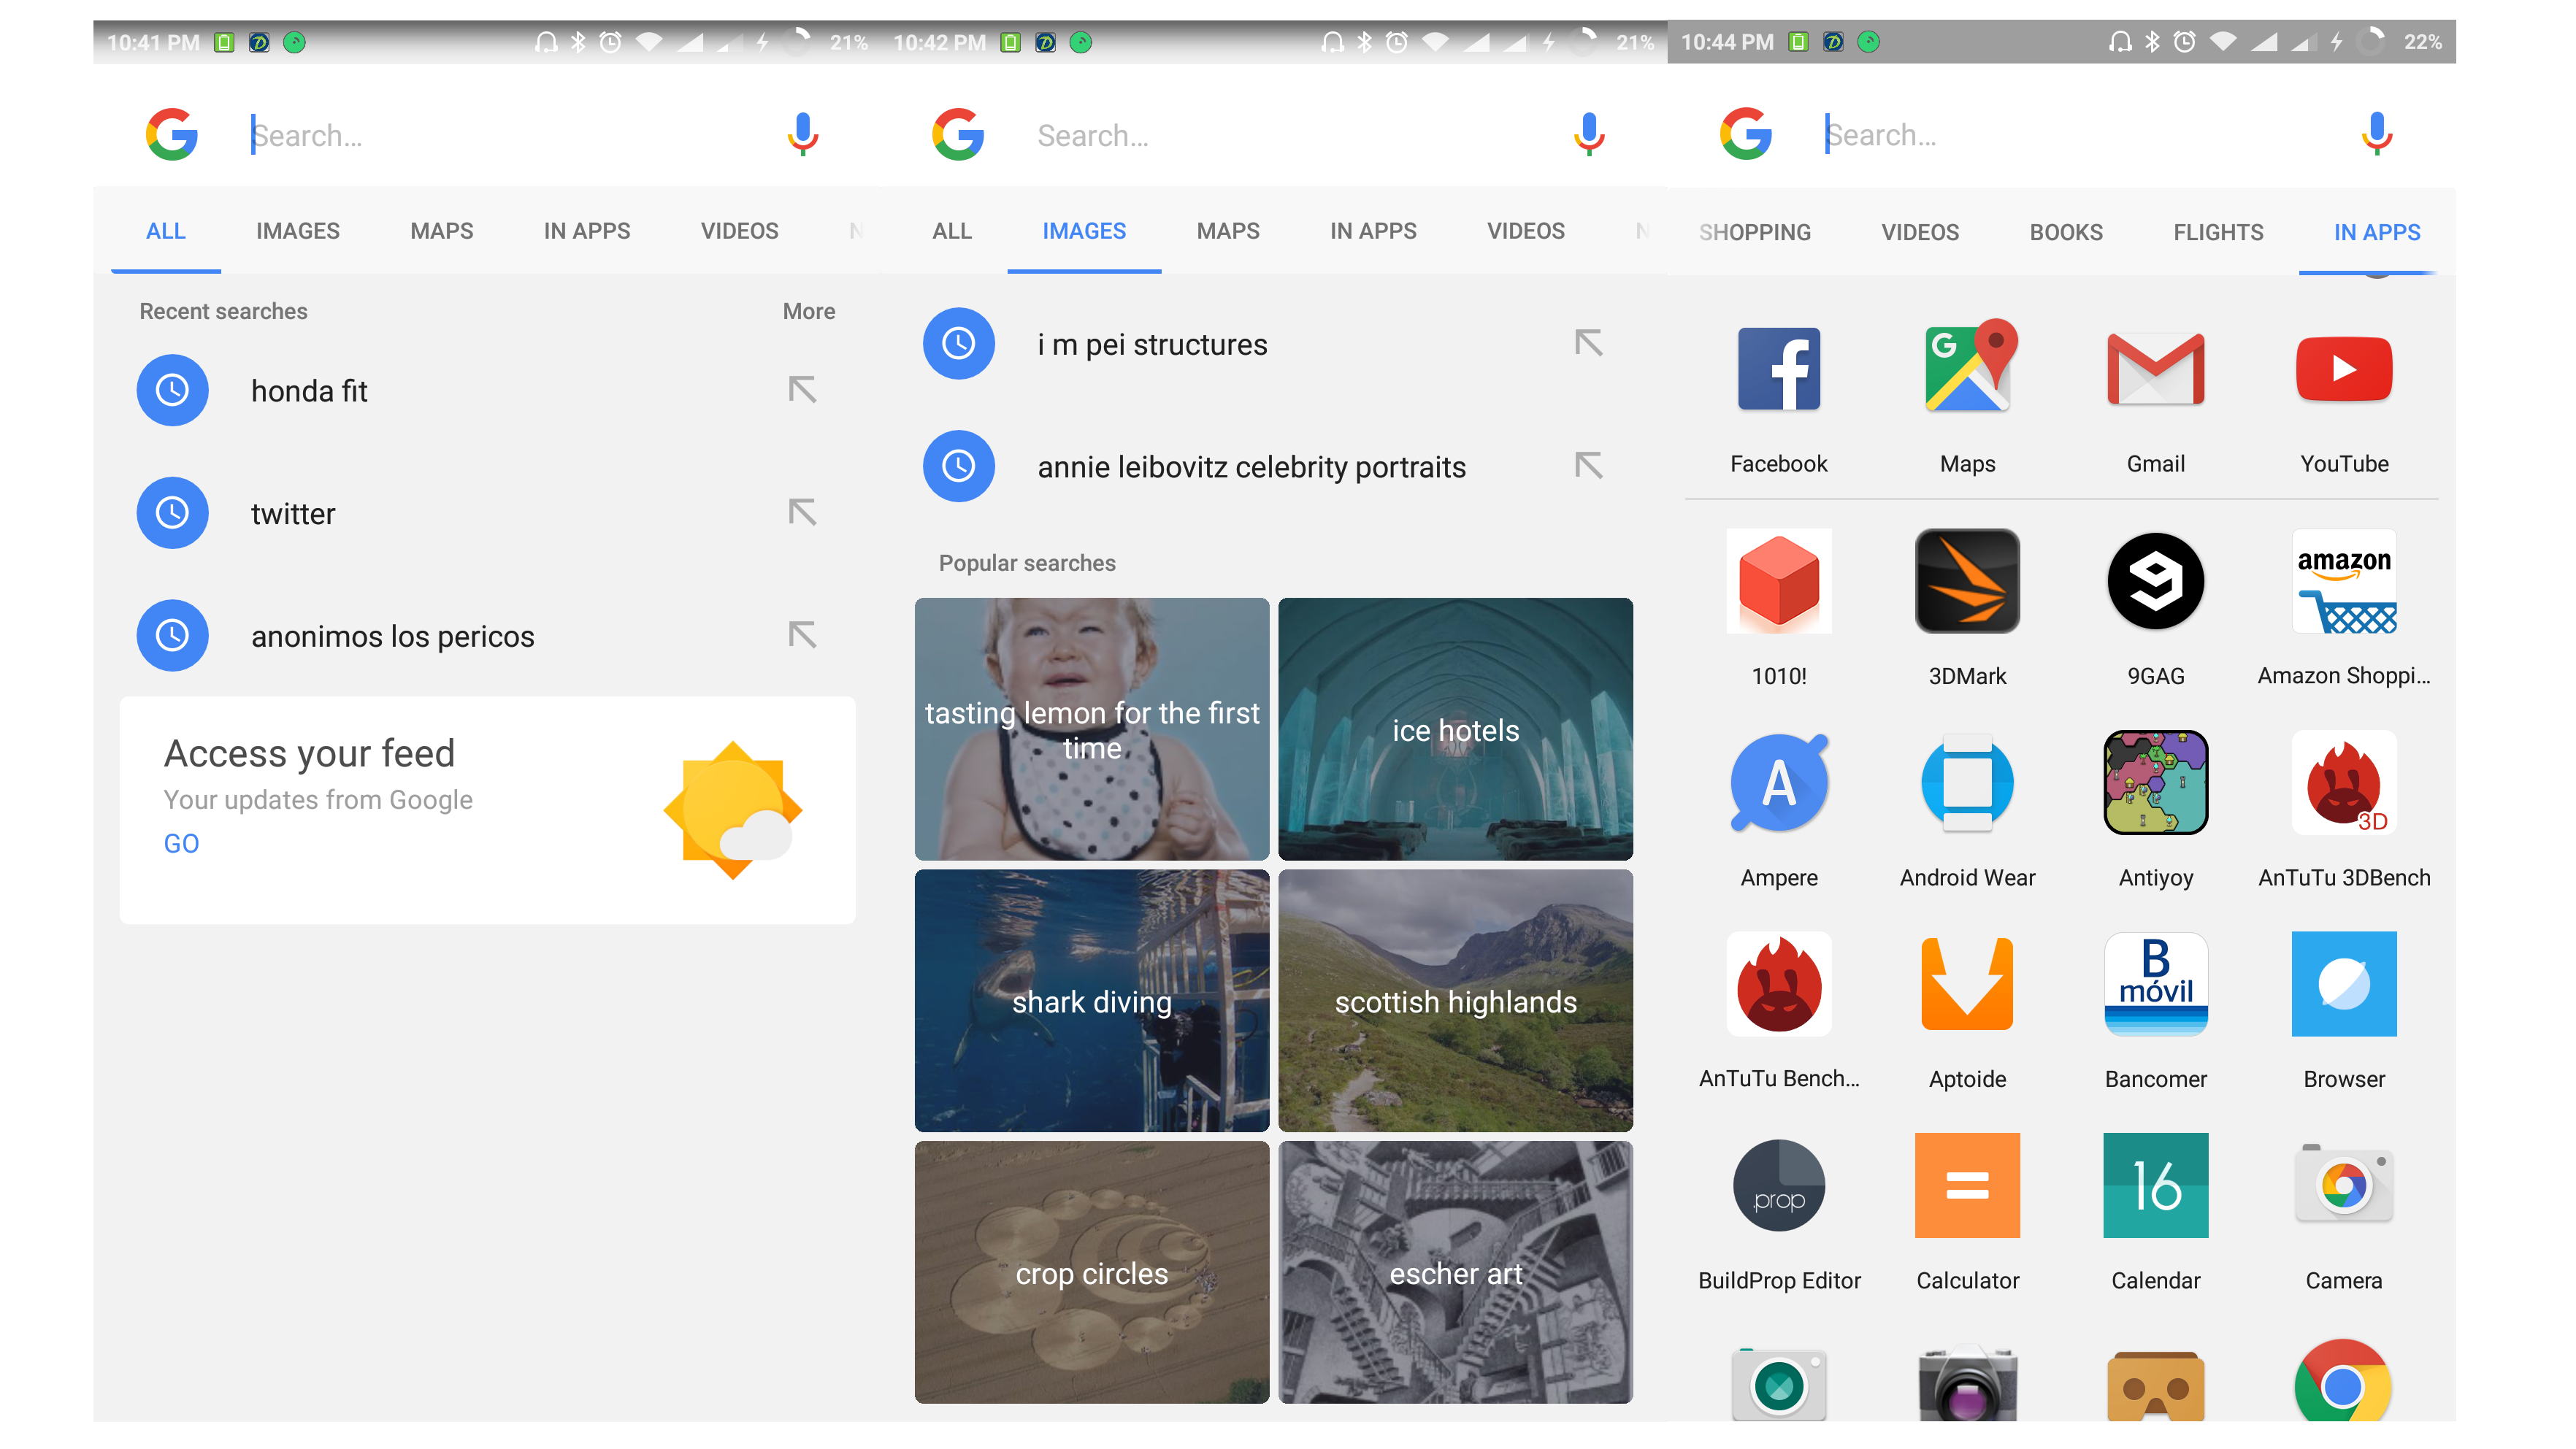 The Google app on Android might be getting a facelift soon